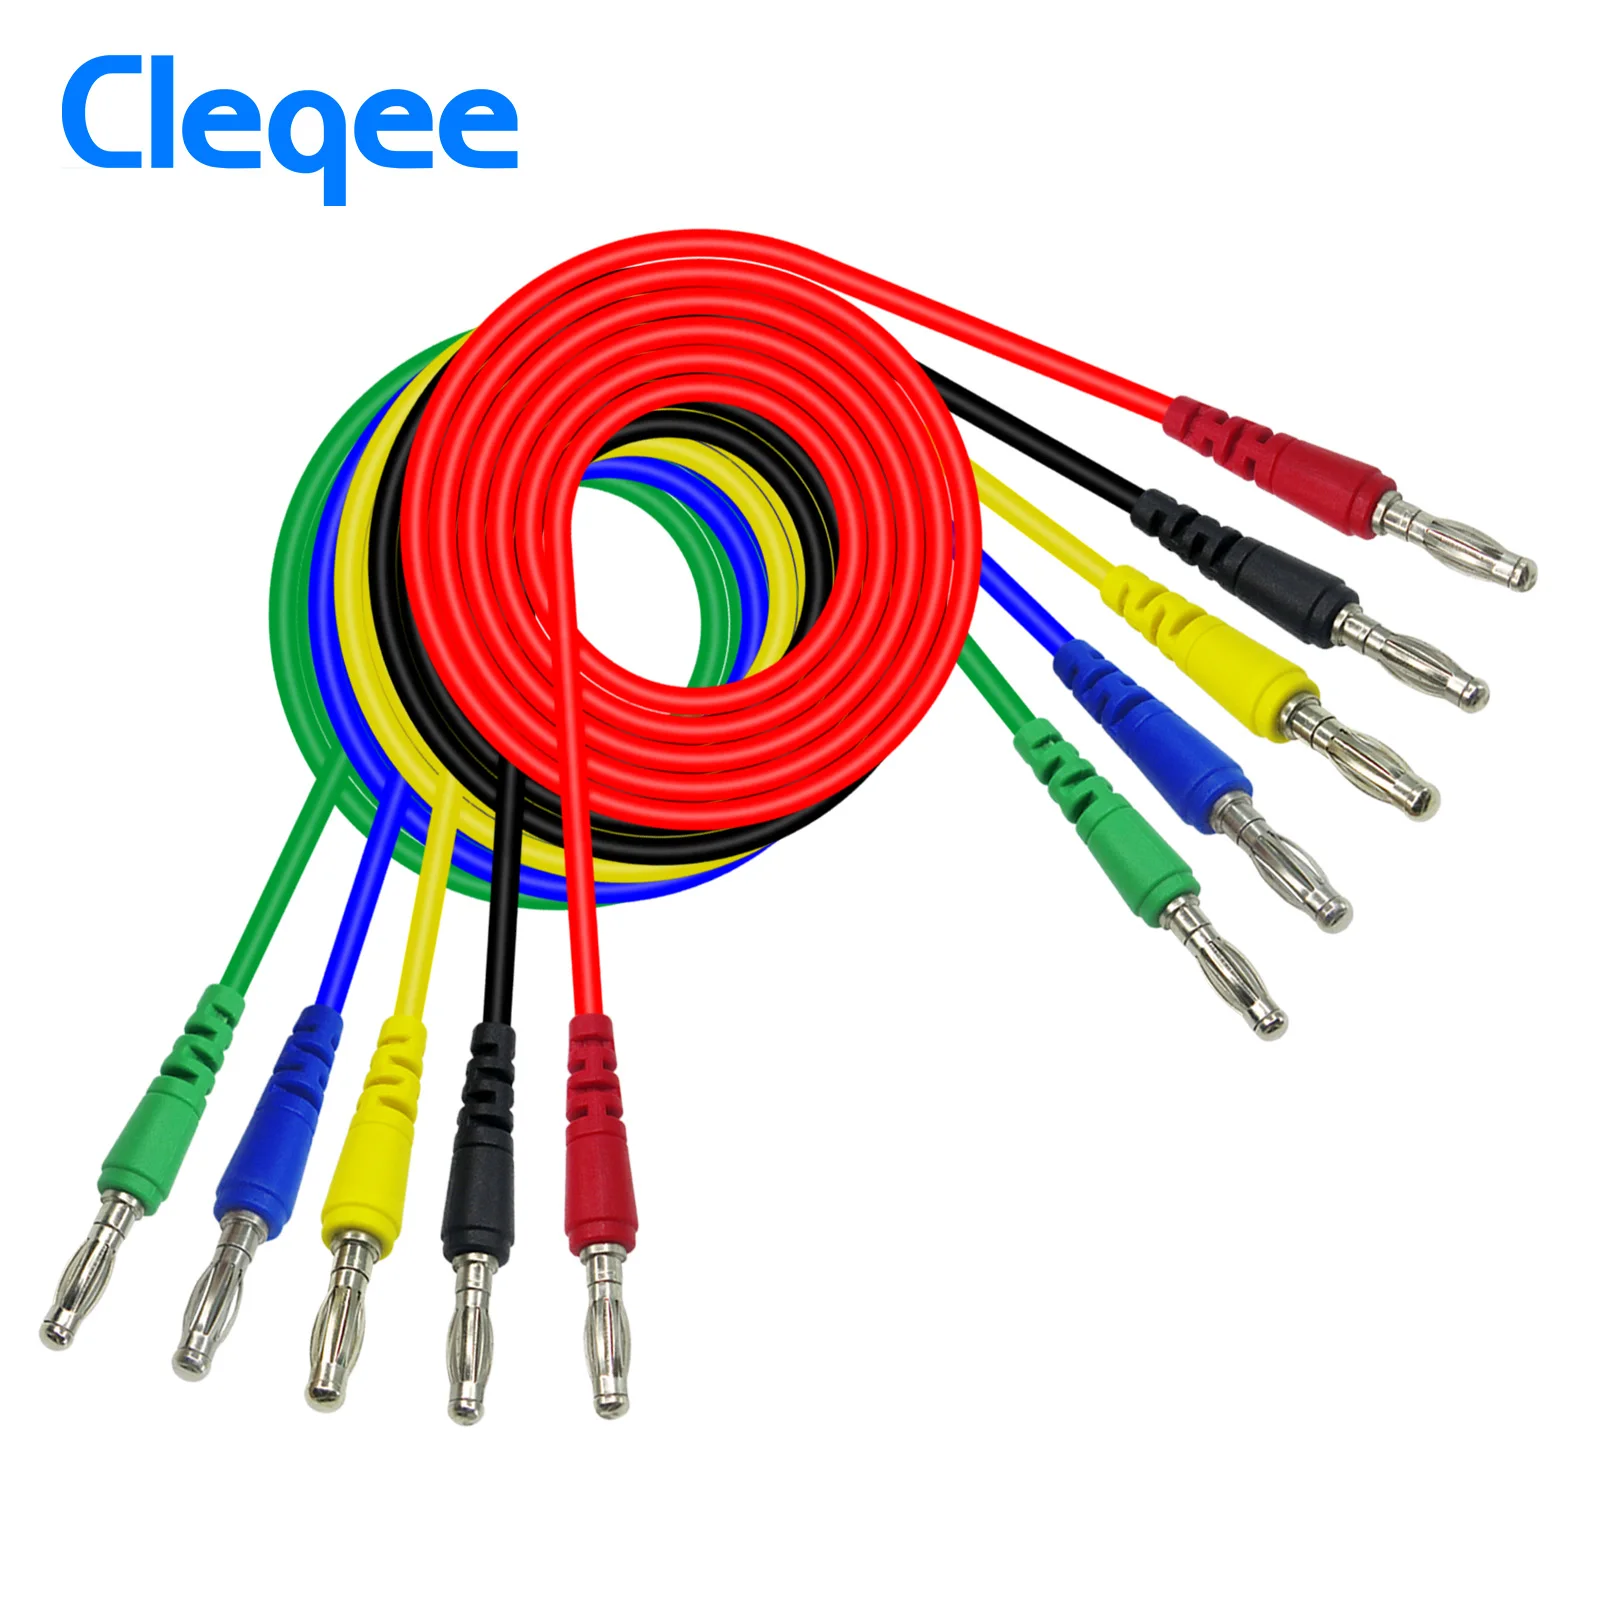 Cleqee Multimeter Test Leads Kit Safety Piercing Probe 4mm Banana  Stainless Nee - $228.15